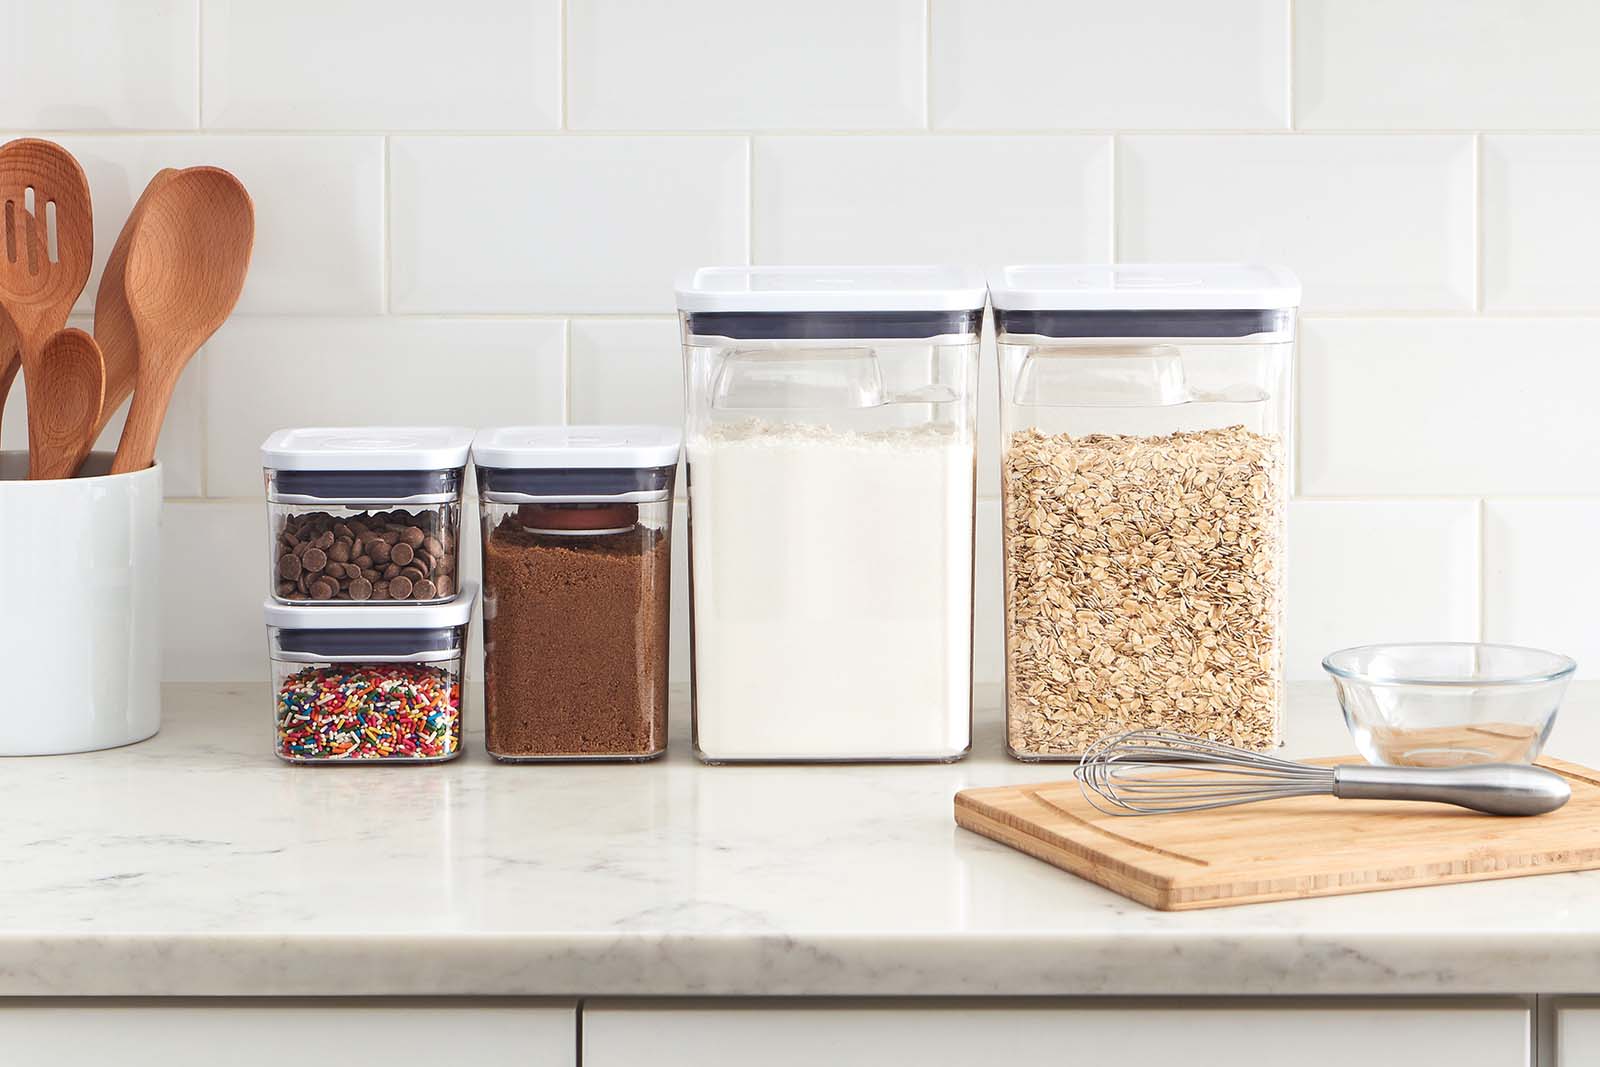 Guide to OXO POP Containers - How to Use the Dry Food Storage Containers   Food storage containers organization, Oxo pop containers, Dry food storage